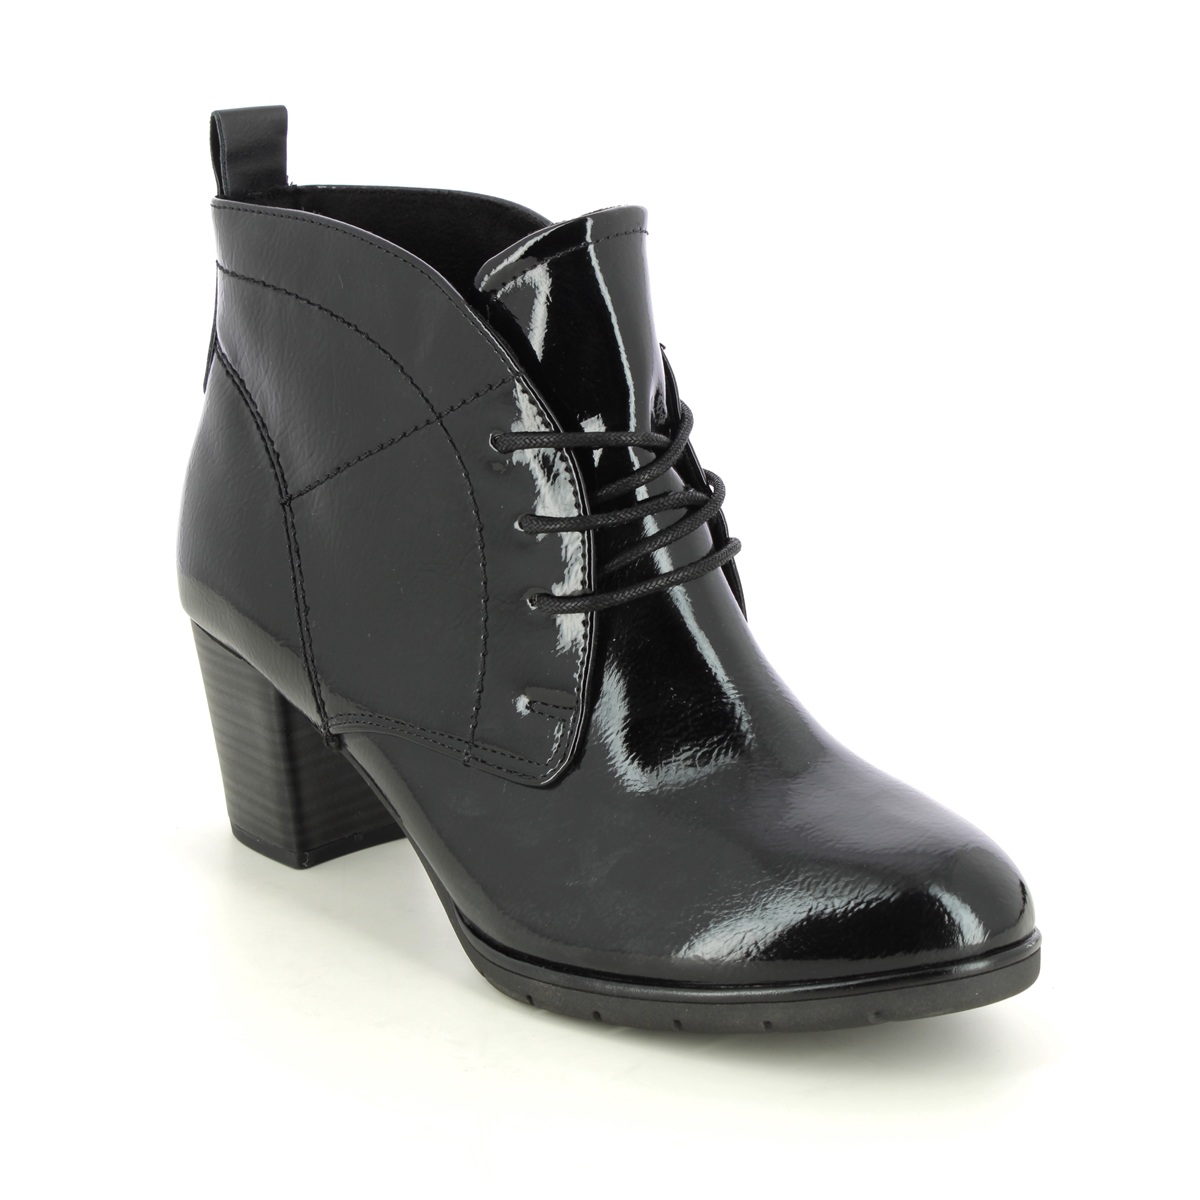 Marco Tozzi Pepalow Black Patent Womens Heeled Boots 25109-41-018 In Size 37 In Plain Black Patent